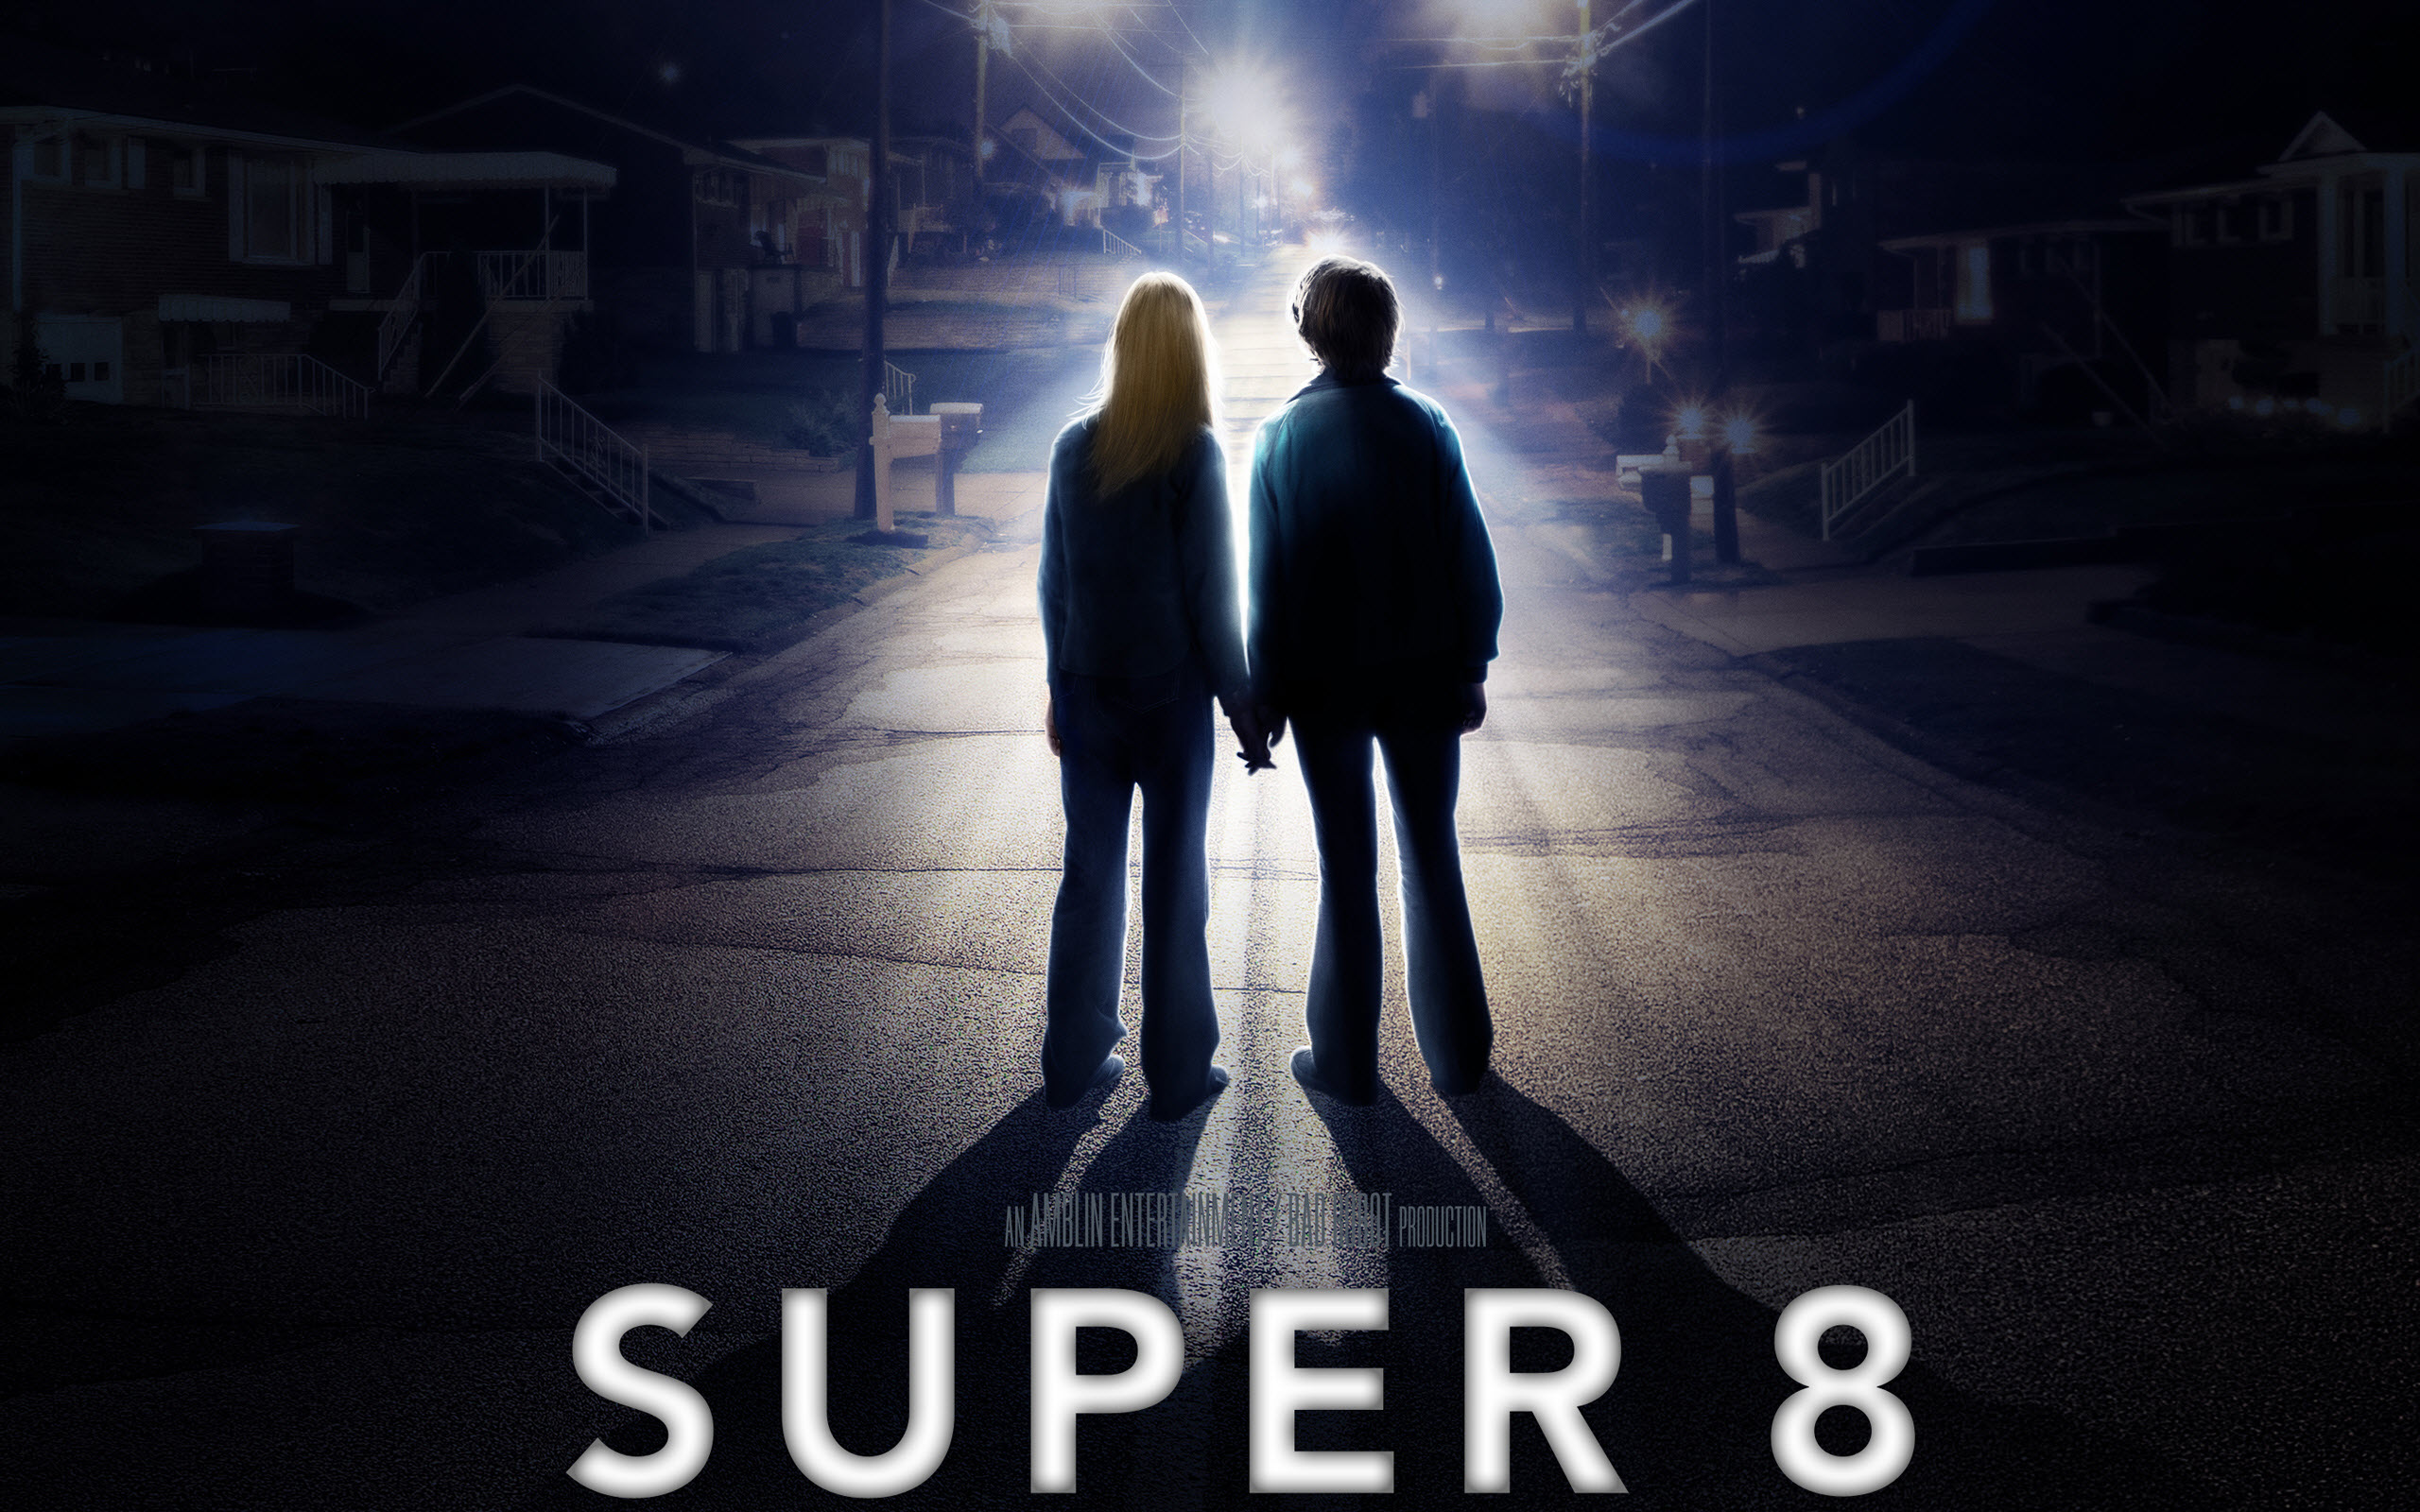 Super 8 2011 Post in 25601600 Pixel an Innocent and Lovely Pair of